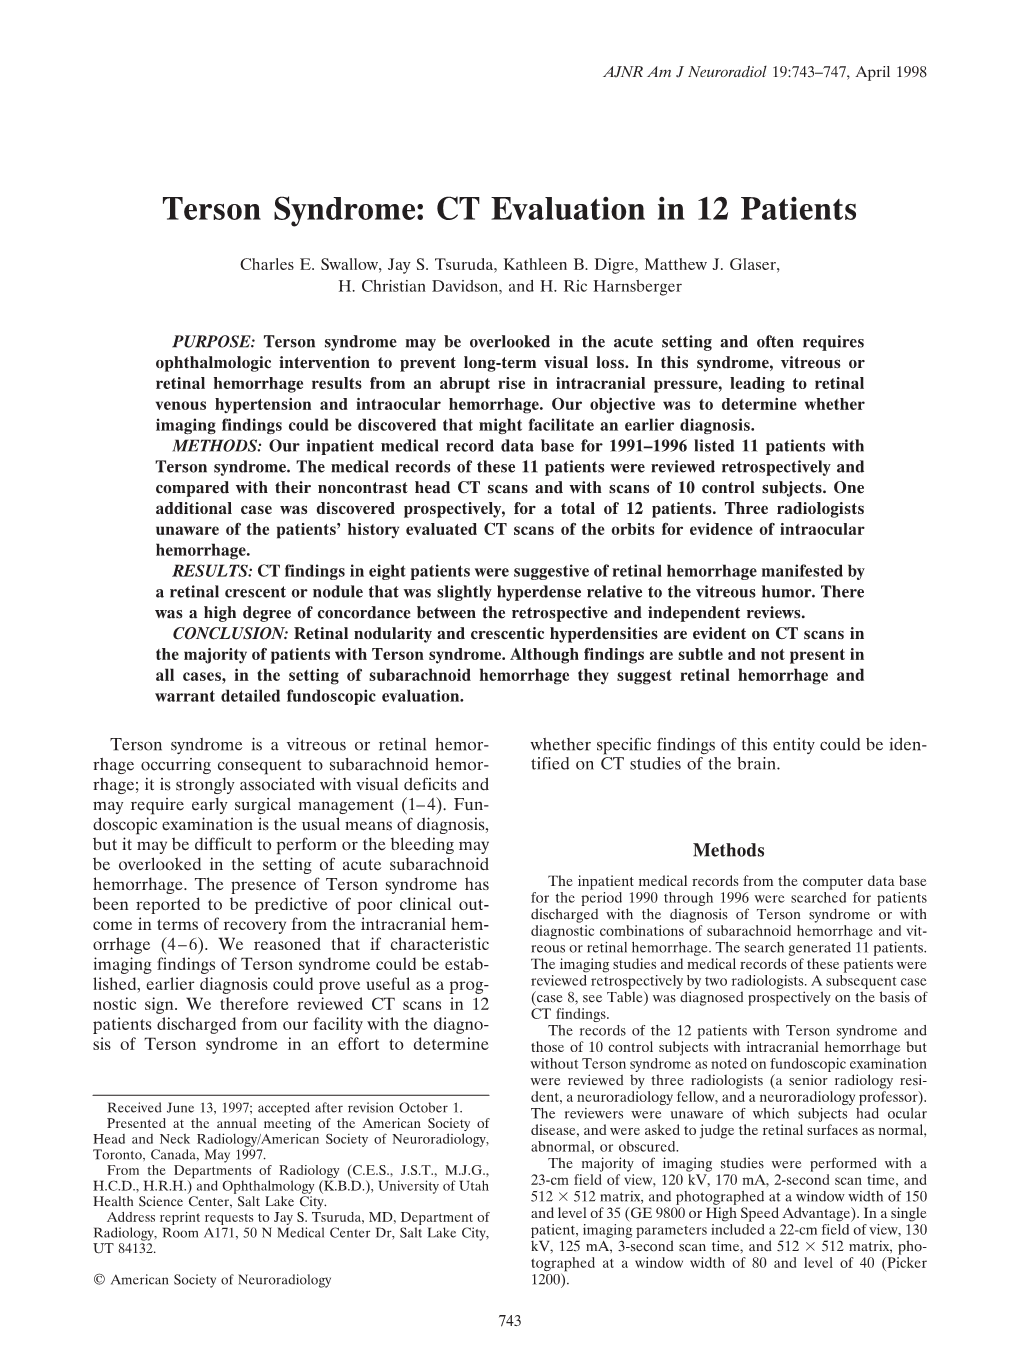 Terson Syndrome: CT Evaluation in 12 Patients